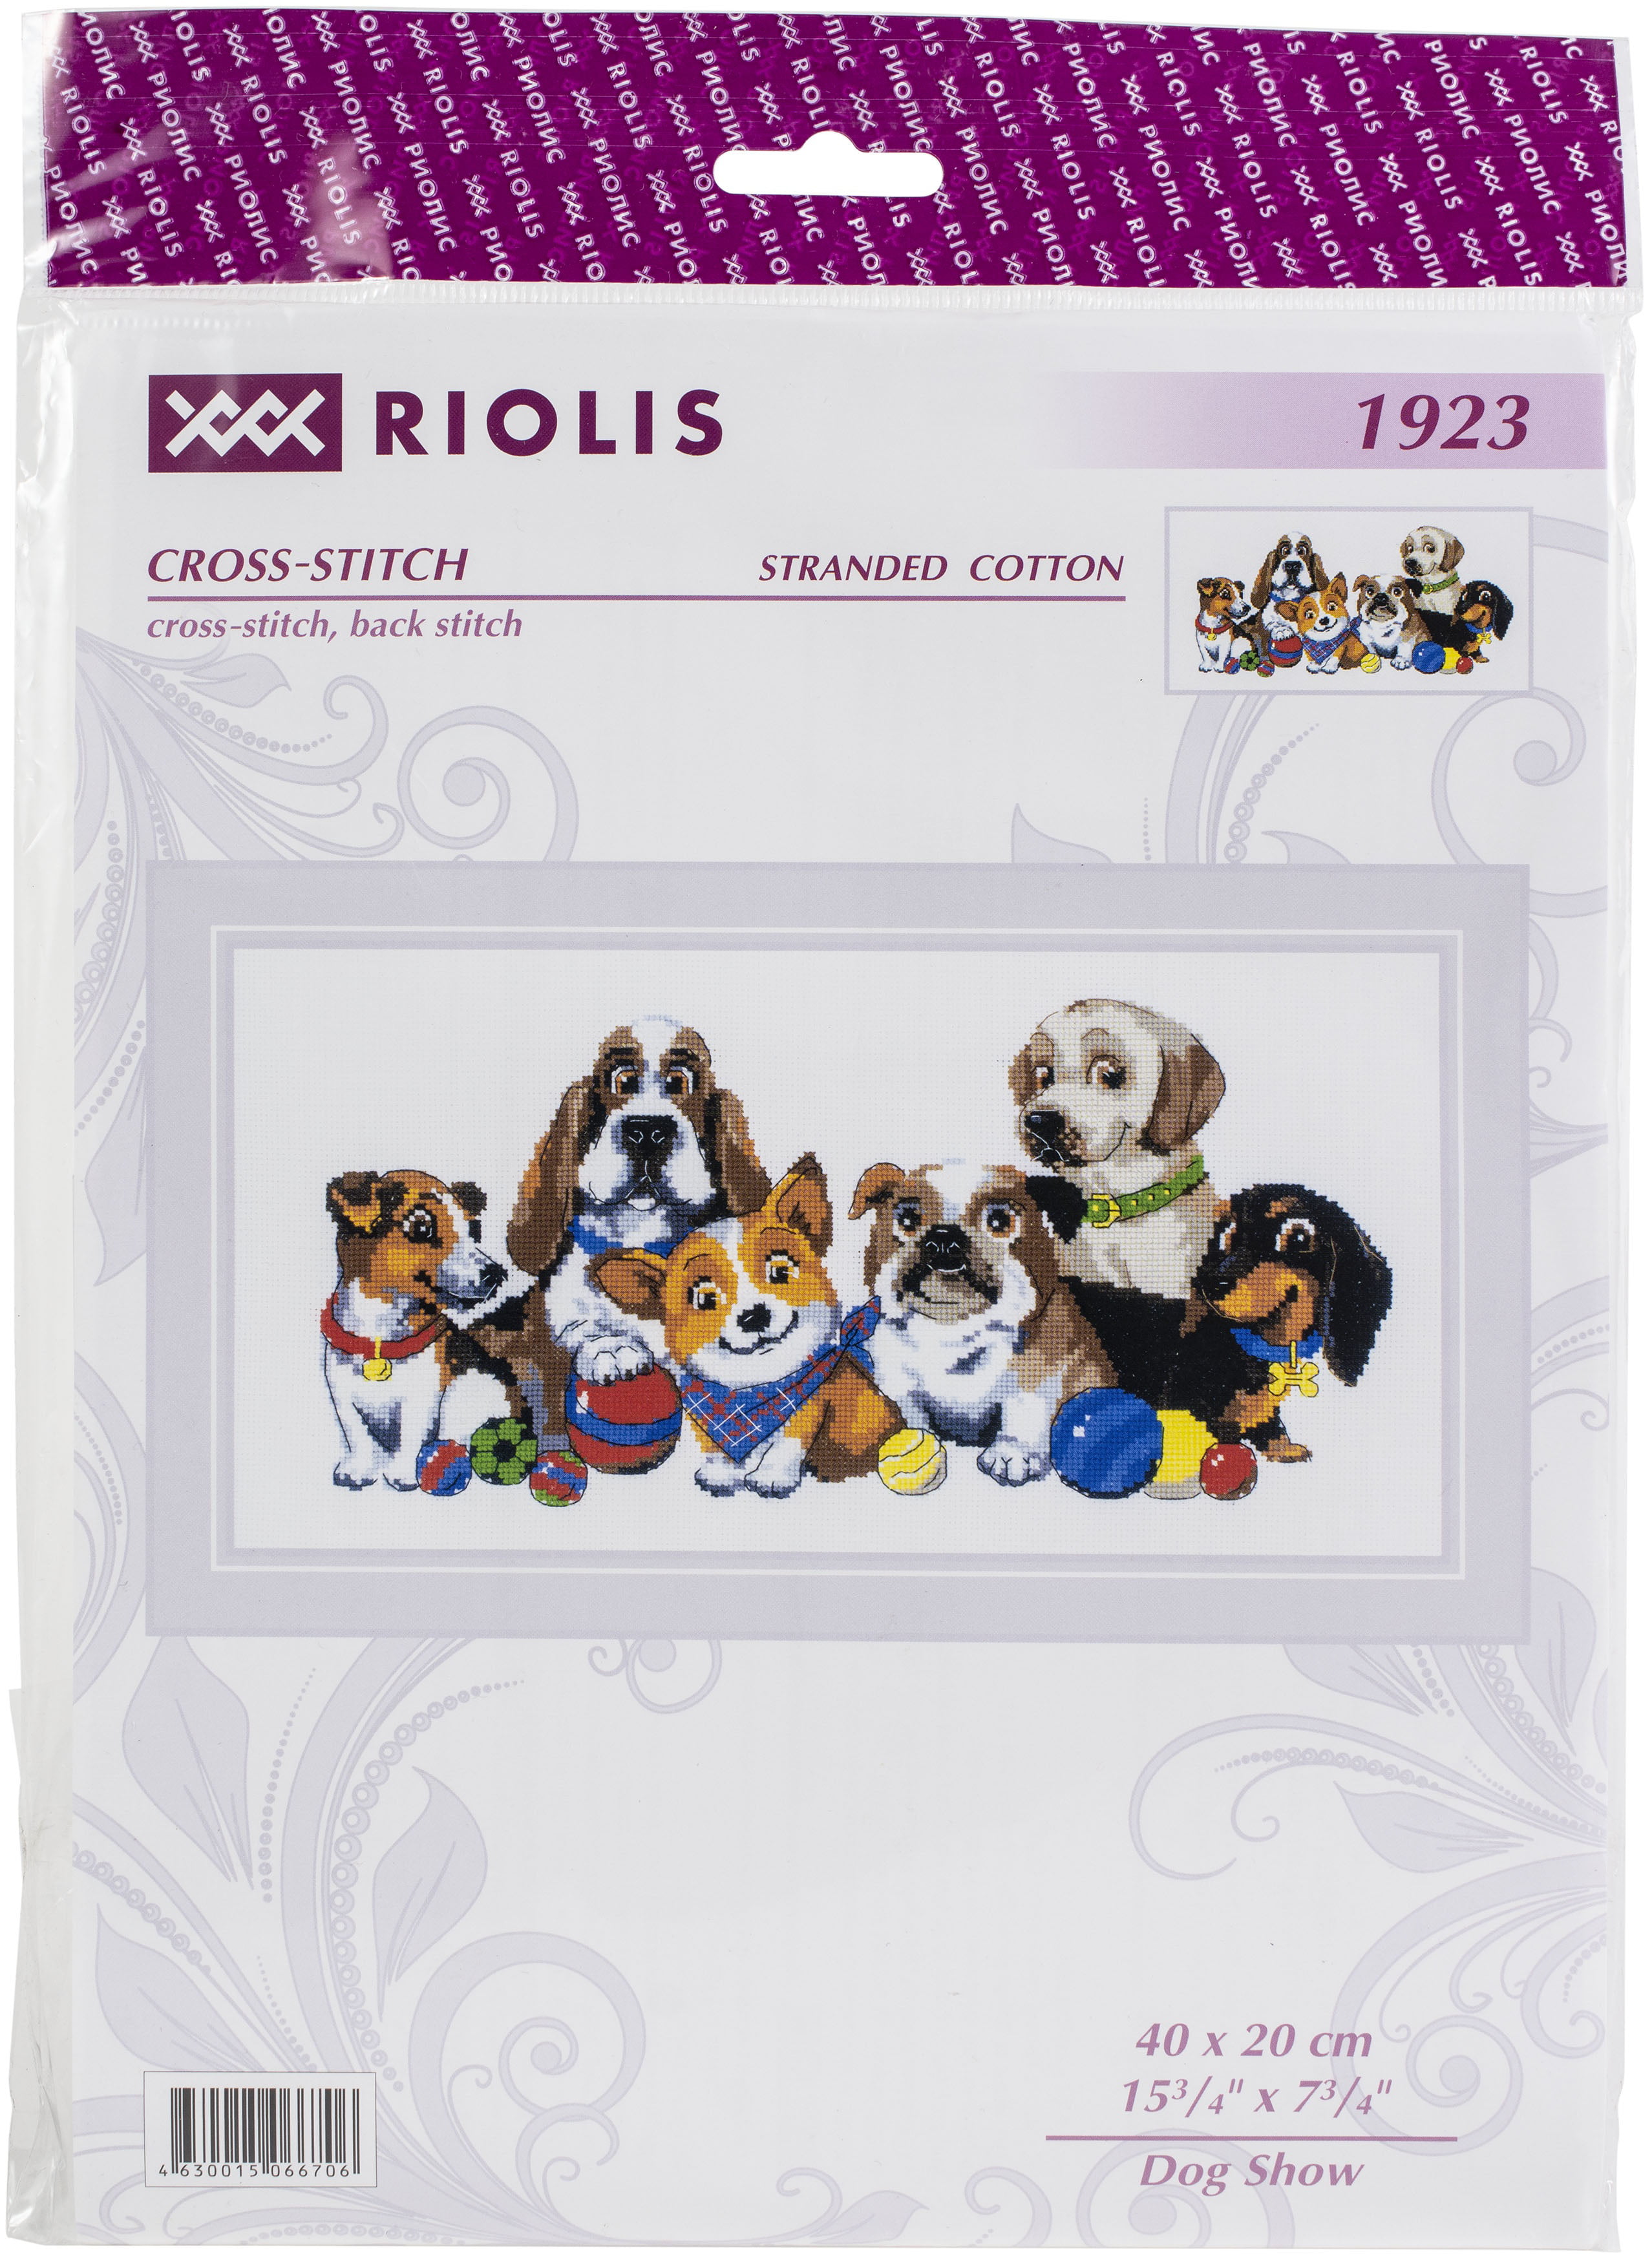 14 Count RIOLIS Counted Cross Stitch Kit 15.75"X11.75"-Pets R1248 